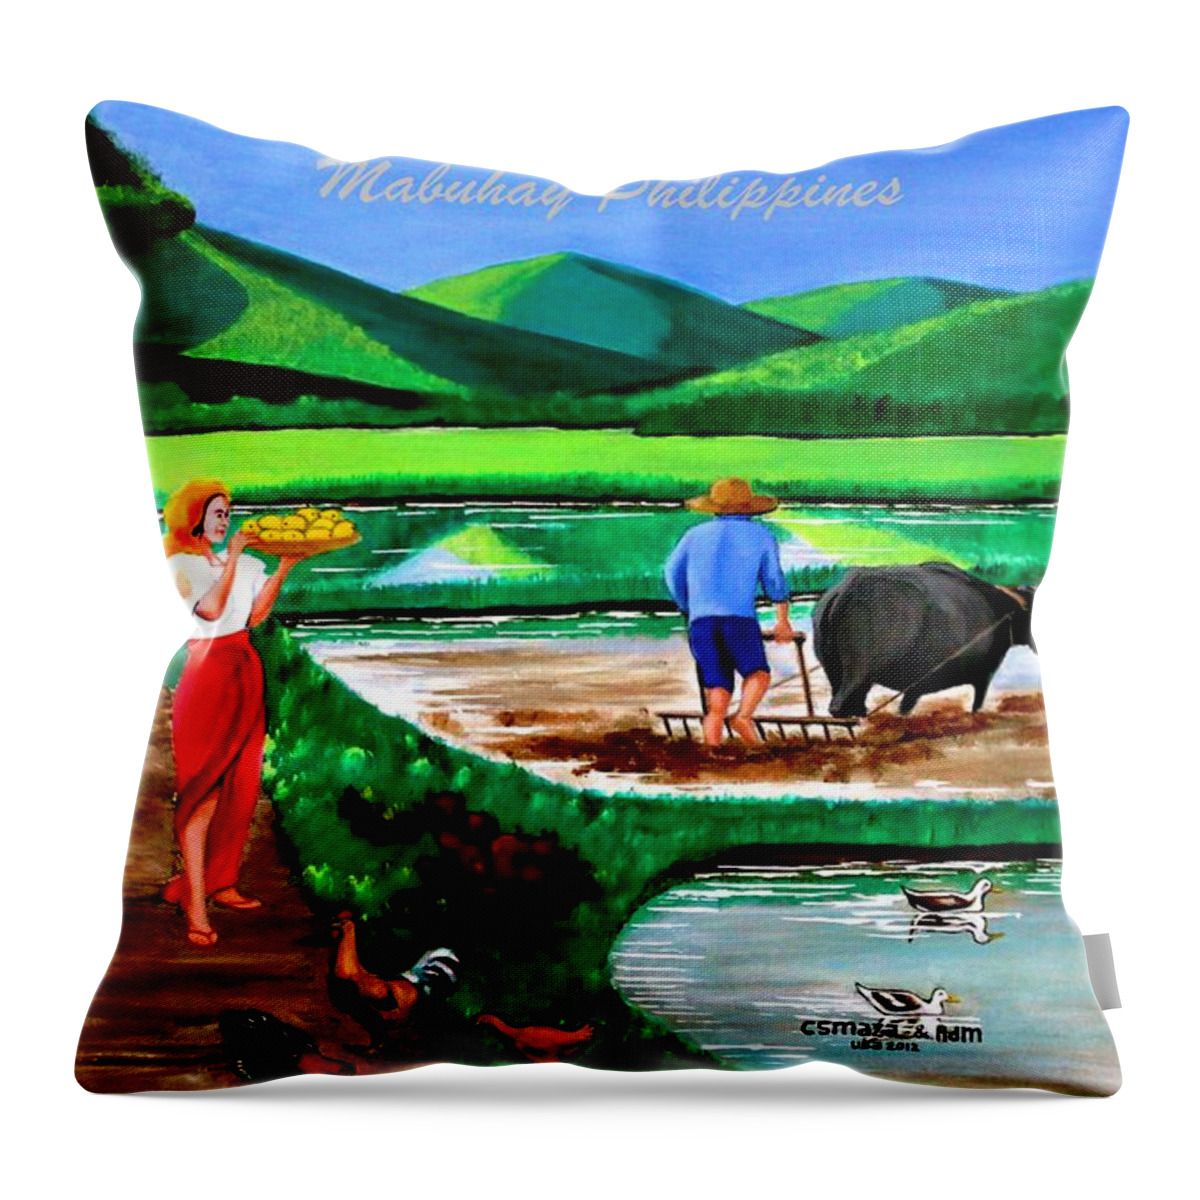 All Products Throw Pillow featuring the painting Mabuhay Philippines by Lorna Maza